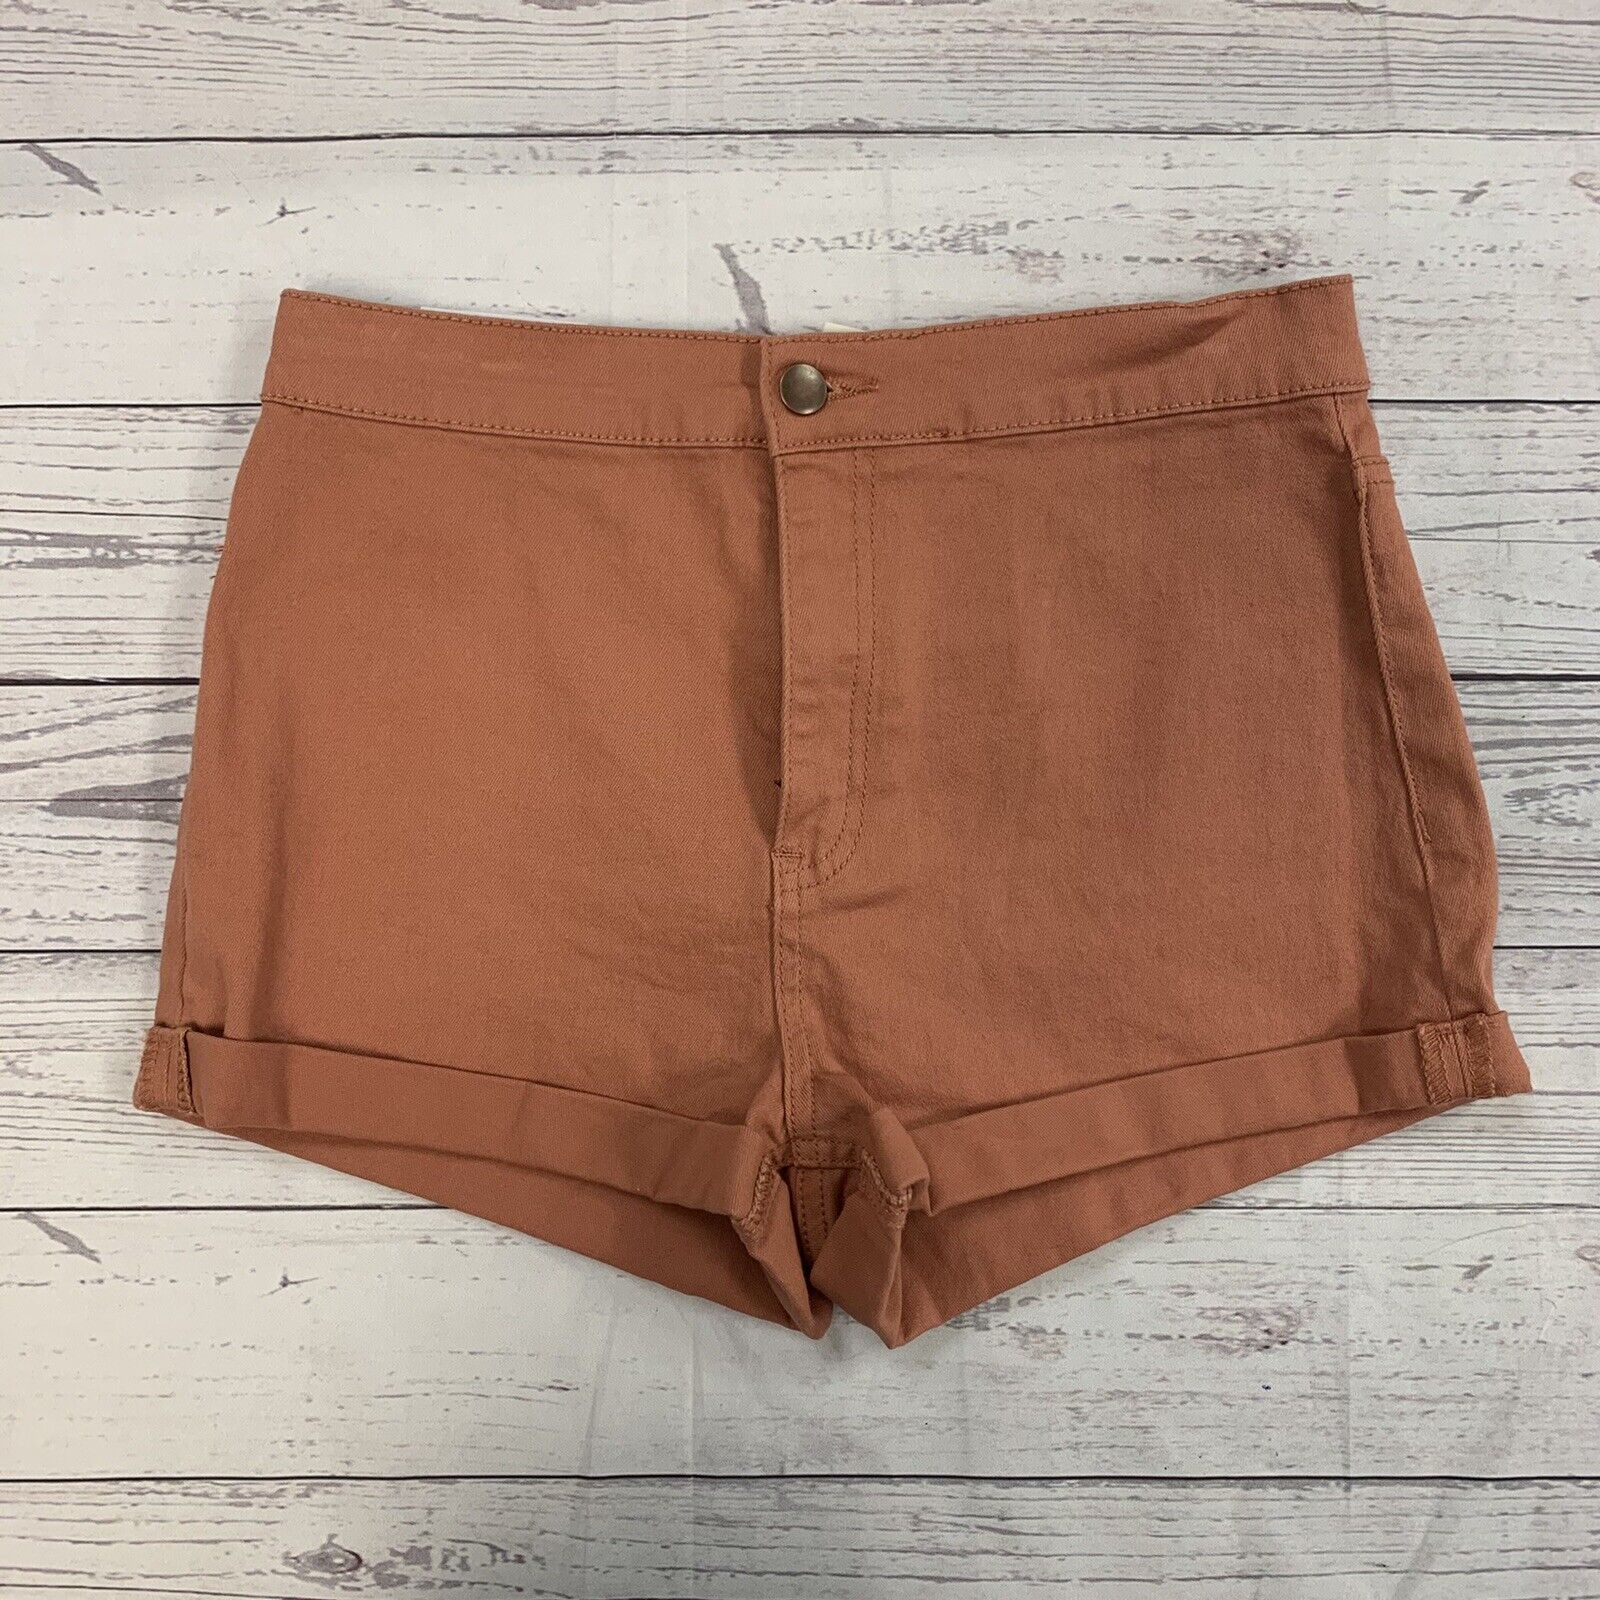 Forever 21 High Rise Shorts Size 28